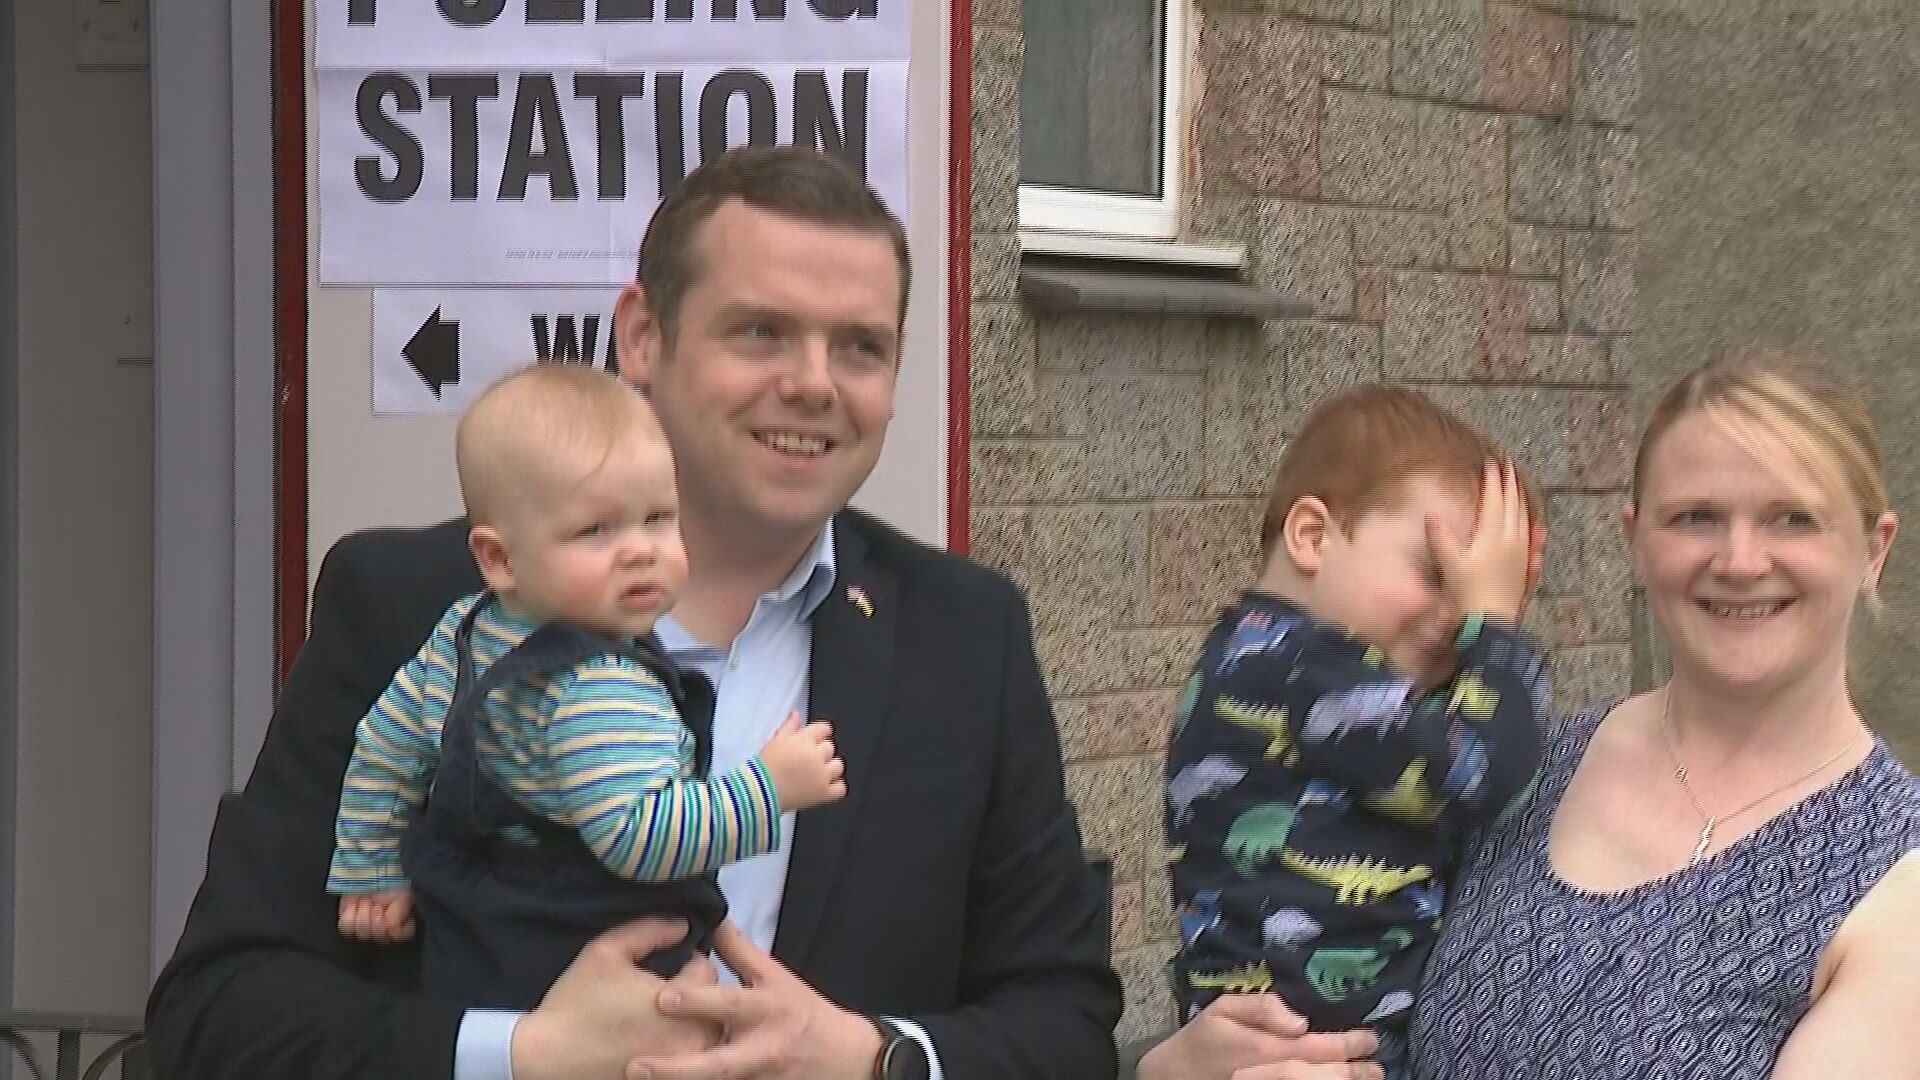 Scottish Conservative leader Douglas Ross and his family at polling station.